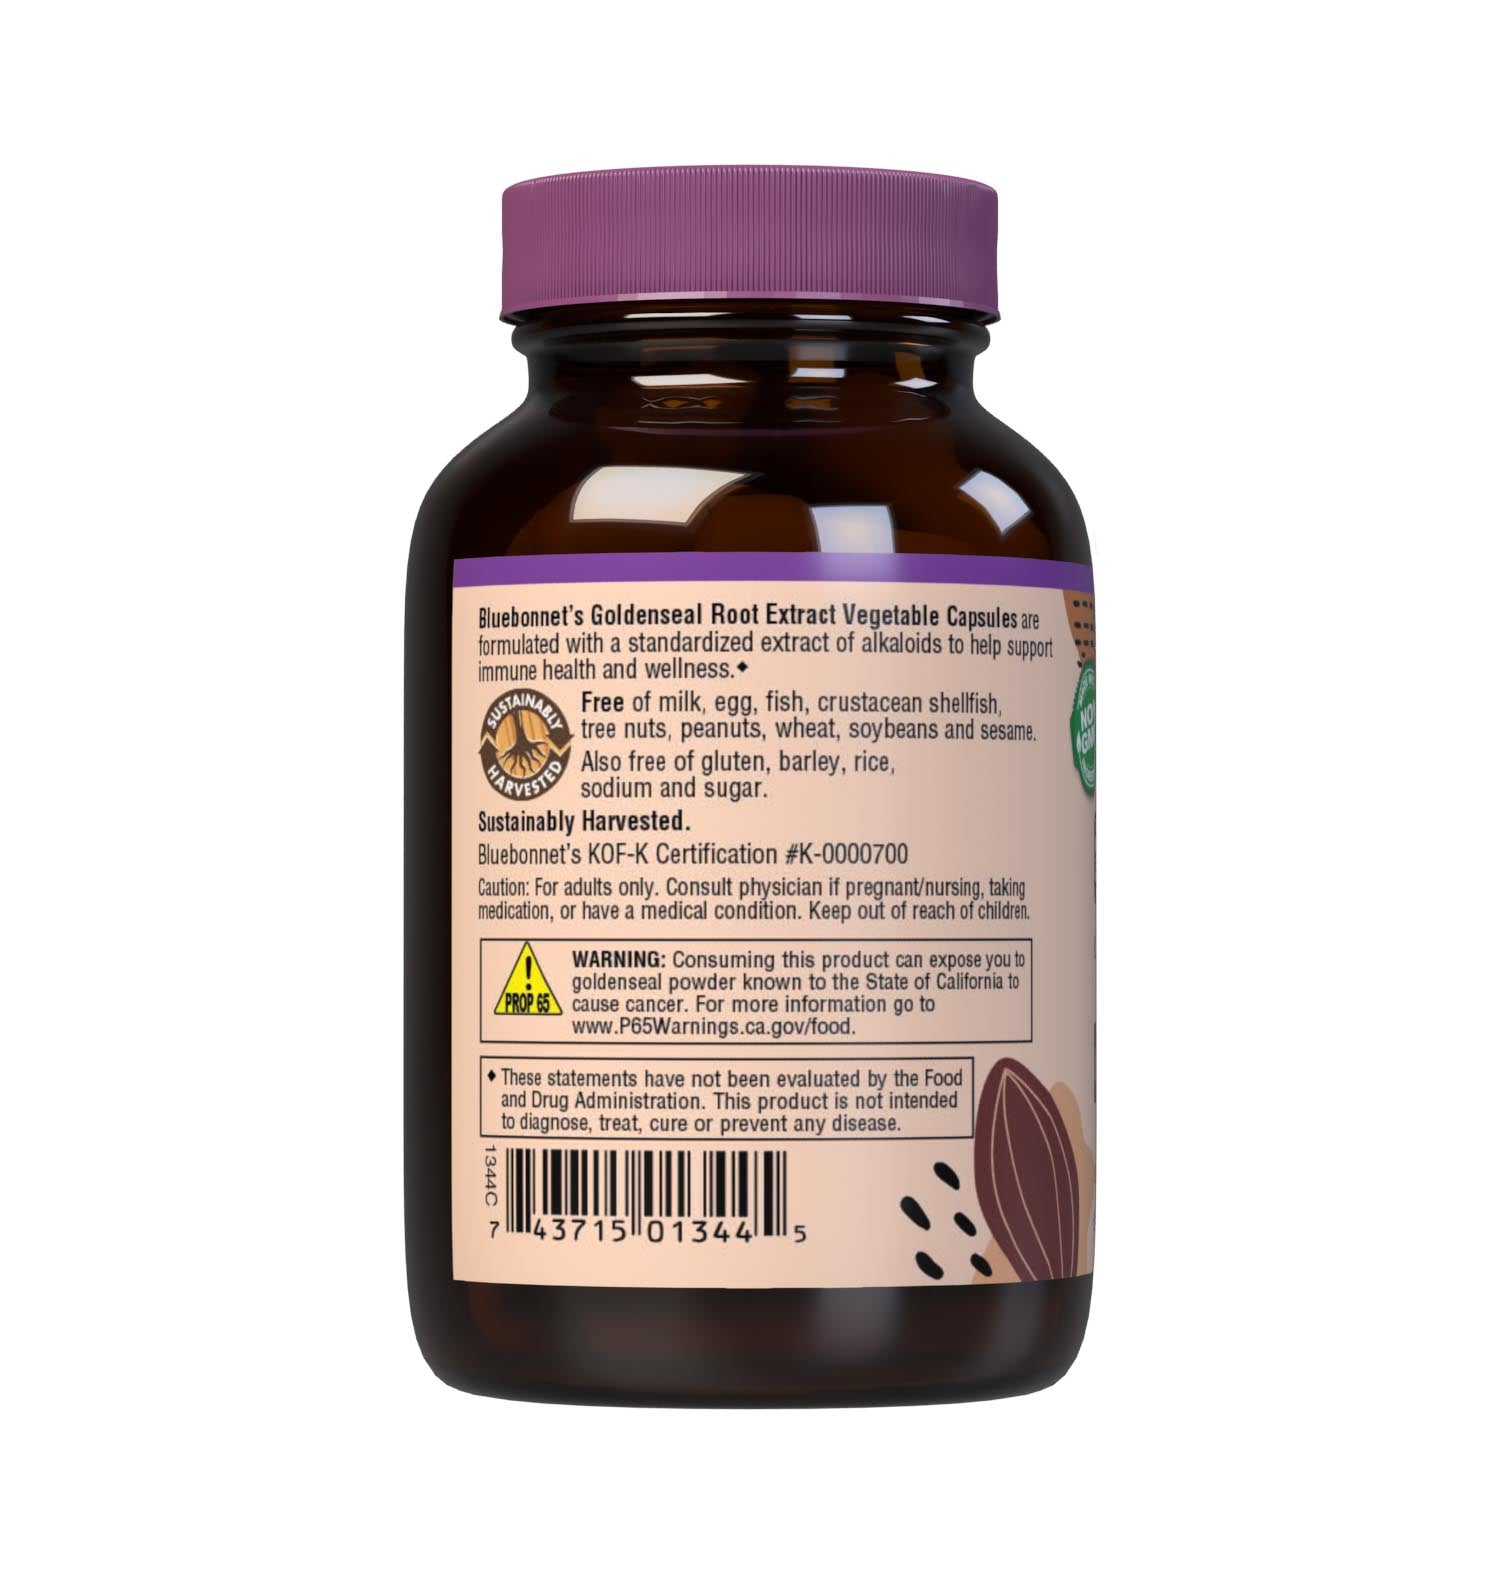 Bluebonnet’s Goldenseal Root Extract 60 Vegetable Capsules contain a standardized extract of alkaloids, the most researched active constituents found in goldenseal. A clean and gentle water-based extraction method is employed to capture and preserve goldenseal’s most valuable components. Description panel. #size_60 count